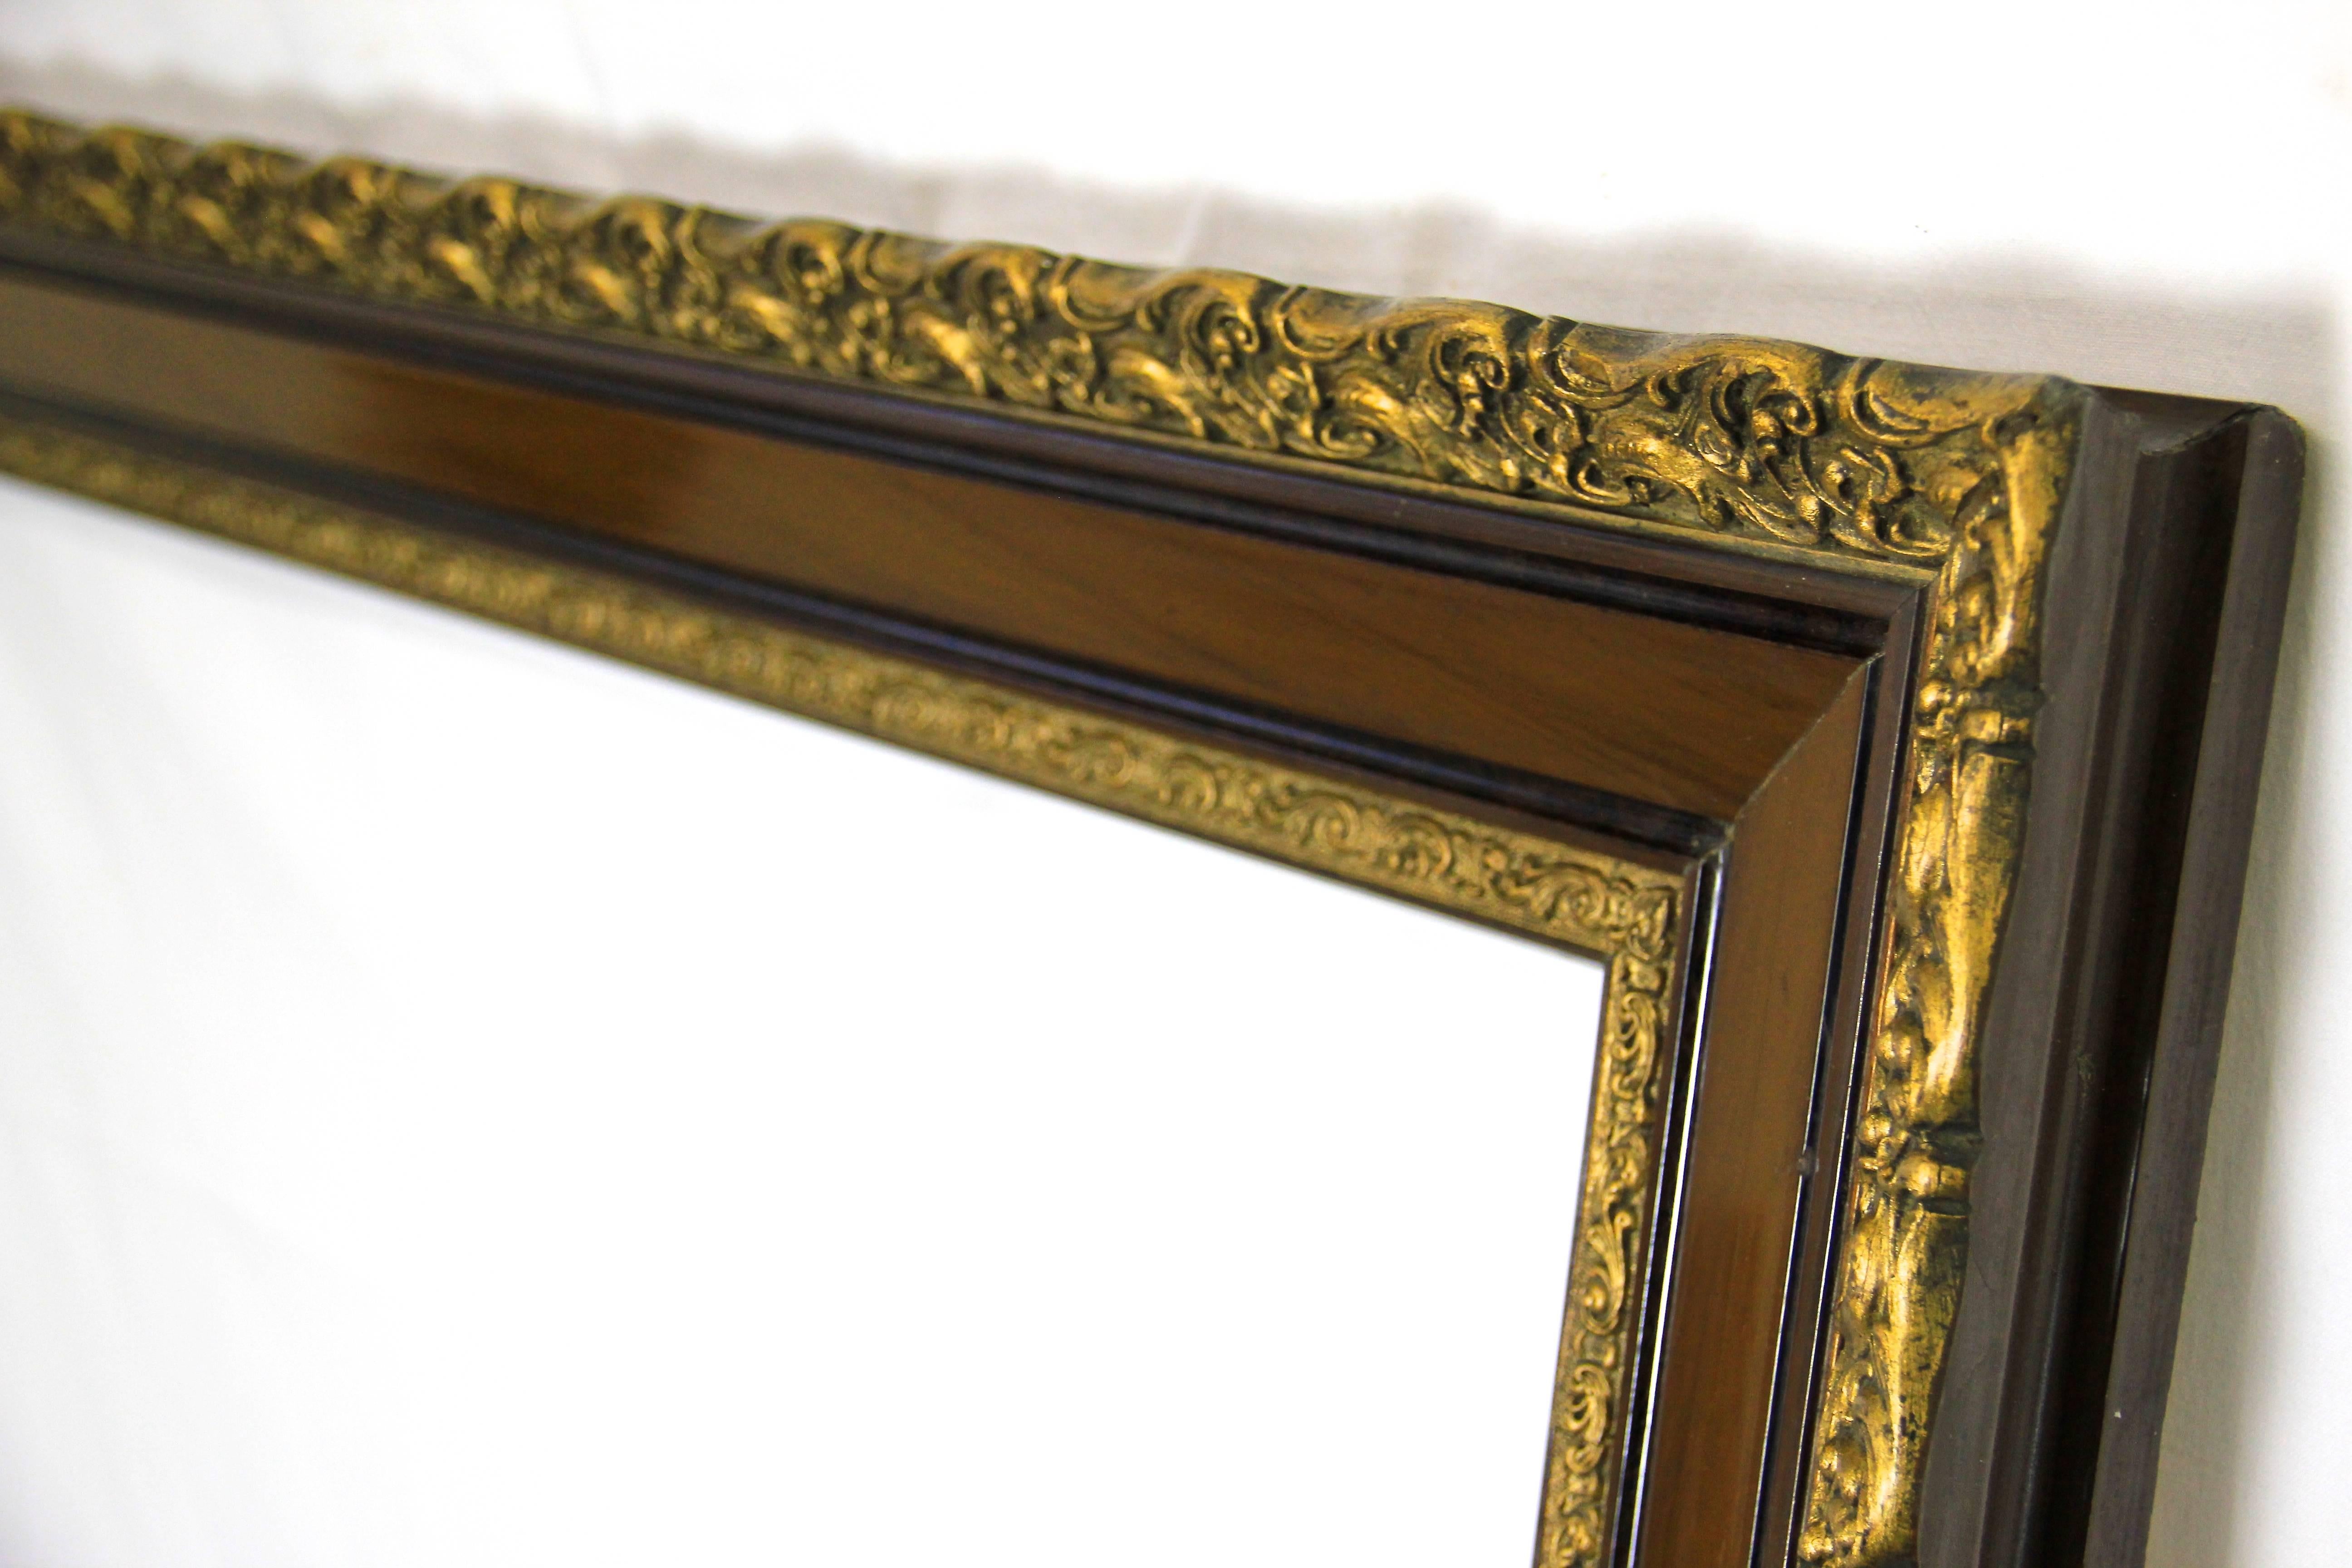 Beautiful large picture frame from the late 19th century in Austria. This frame shows a unique design with golden stucco pattern on the in- and outside. The centerpiece is trimmed to rosewood/nut and got a nice classical shellac finish.
An amazing